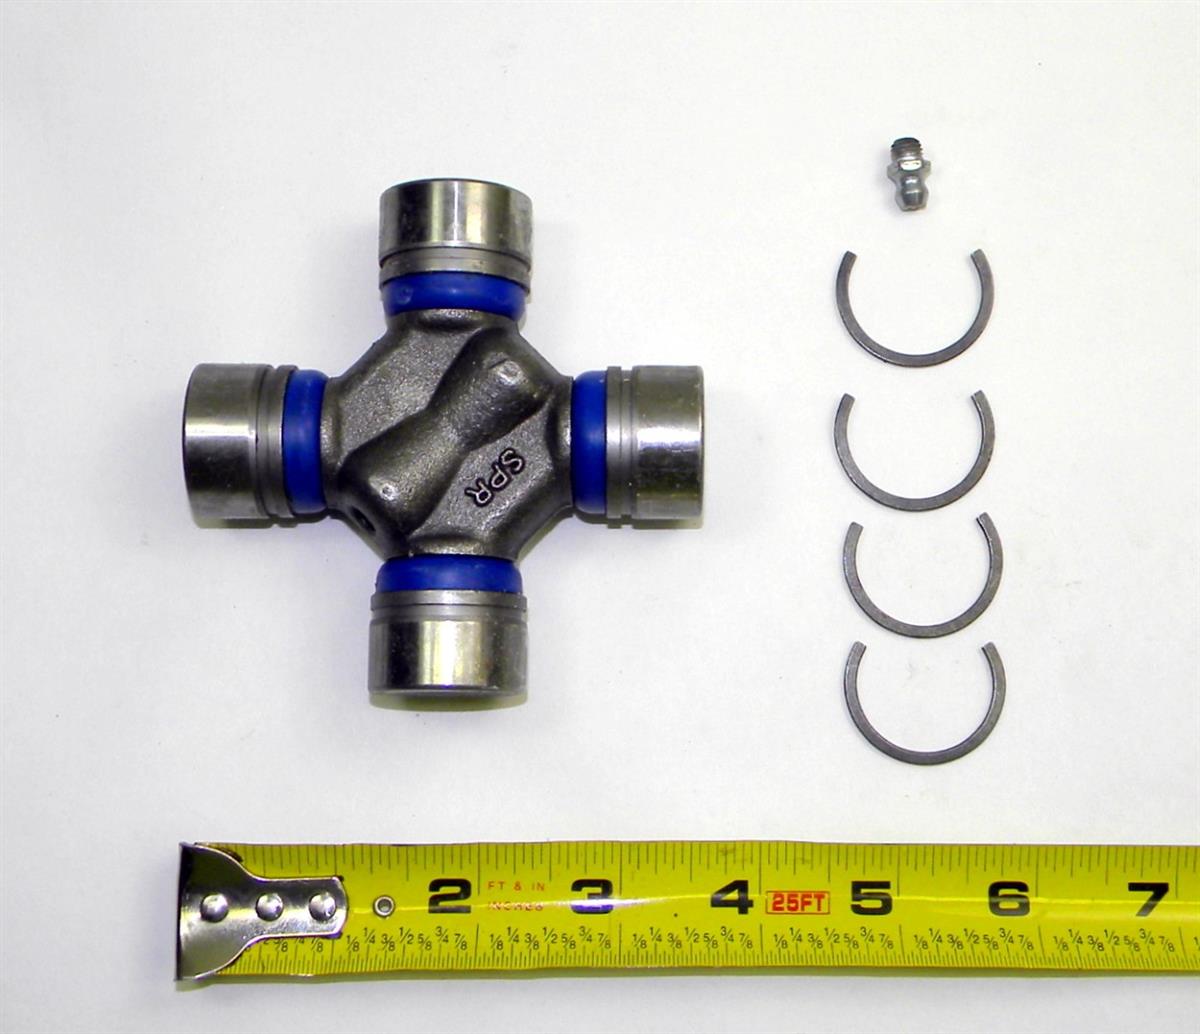 SP-1652 | 2520-01-024-0279 Universal Joint Parts Kit for Rear Propeller Shaft for M1008 and M1009 CUCV. NOS.  (4).JPG